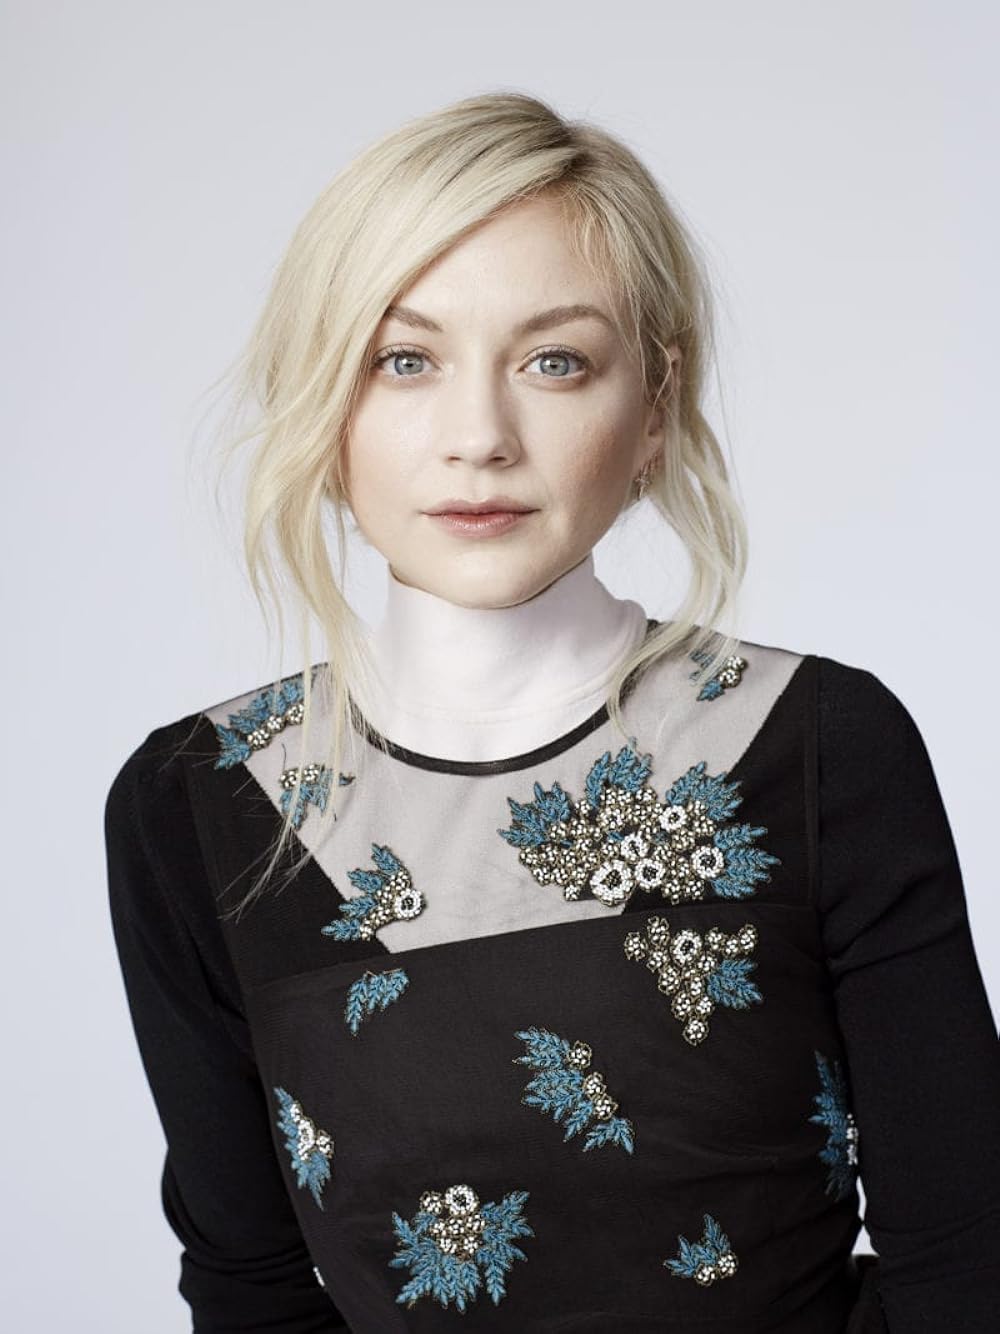 christine pepperman recommends emily kinney hot pics pic